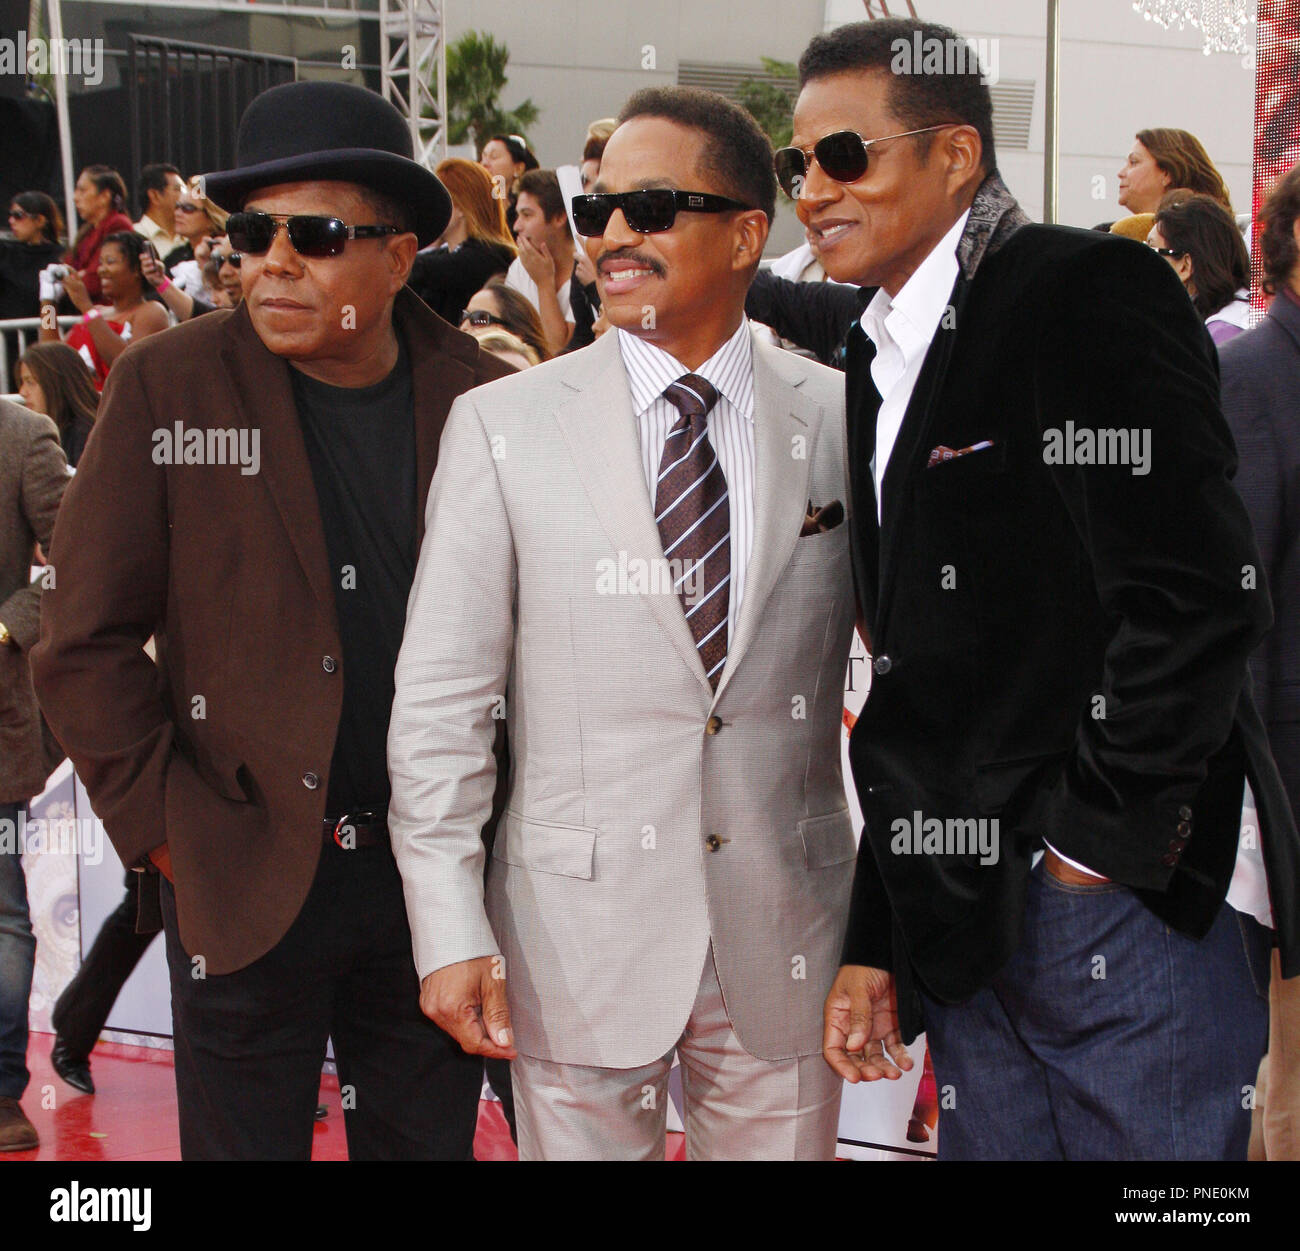 Tito Jackson, Marlon Jackson & Jackie Jackson arriving at the Los Angeles Premiere of Michael Jackson's 'This Is It' held at the NOKIA Theatre in Los Angeles, CA. The event took place on Tuesday, October 27, 2009. Photo by: Pedro Ulayan Pacific Rim Photo Press.  / PictureLux File Reference # TitoJackson MarlonJackson JackieJackson 102709 1PRPP   For Editorial Use Only -  All Rights Reserved Stock Photo